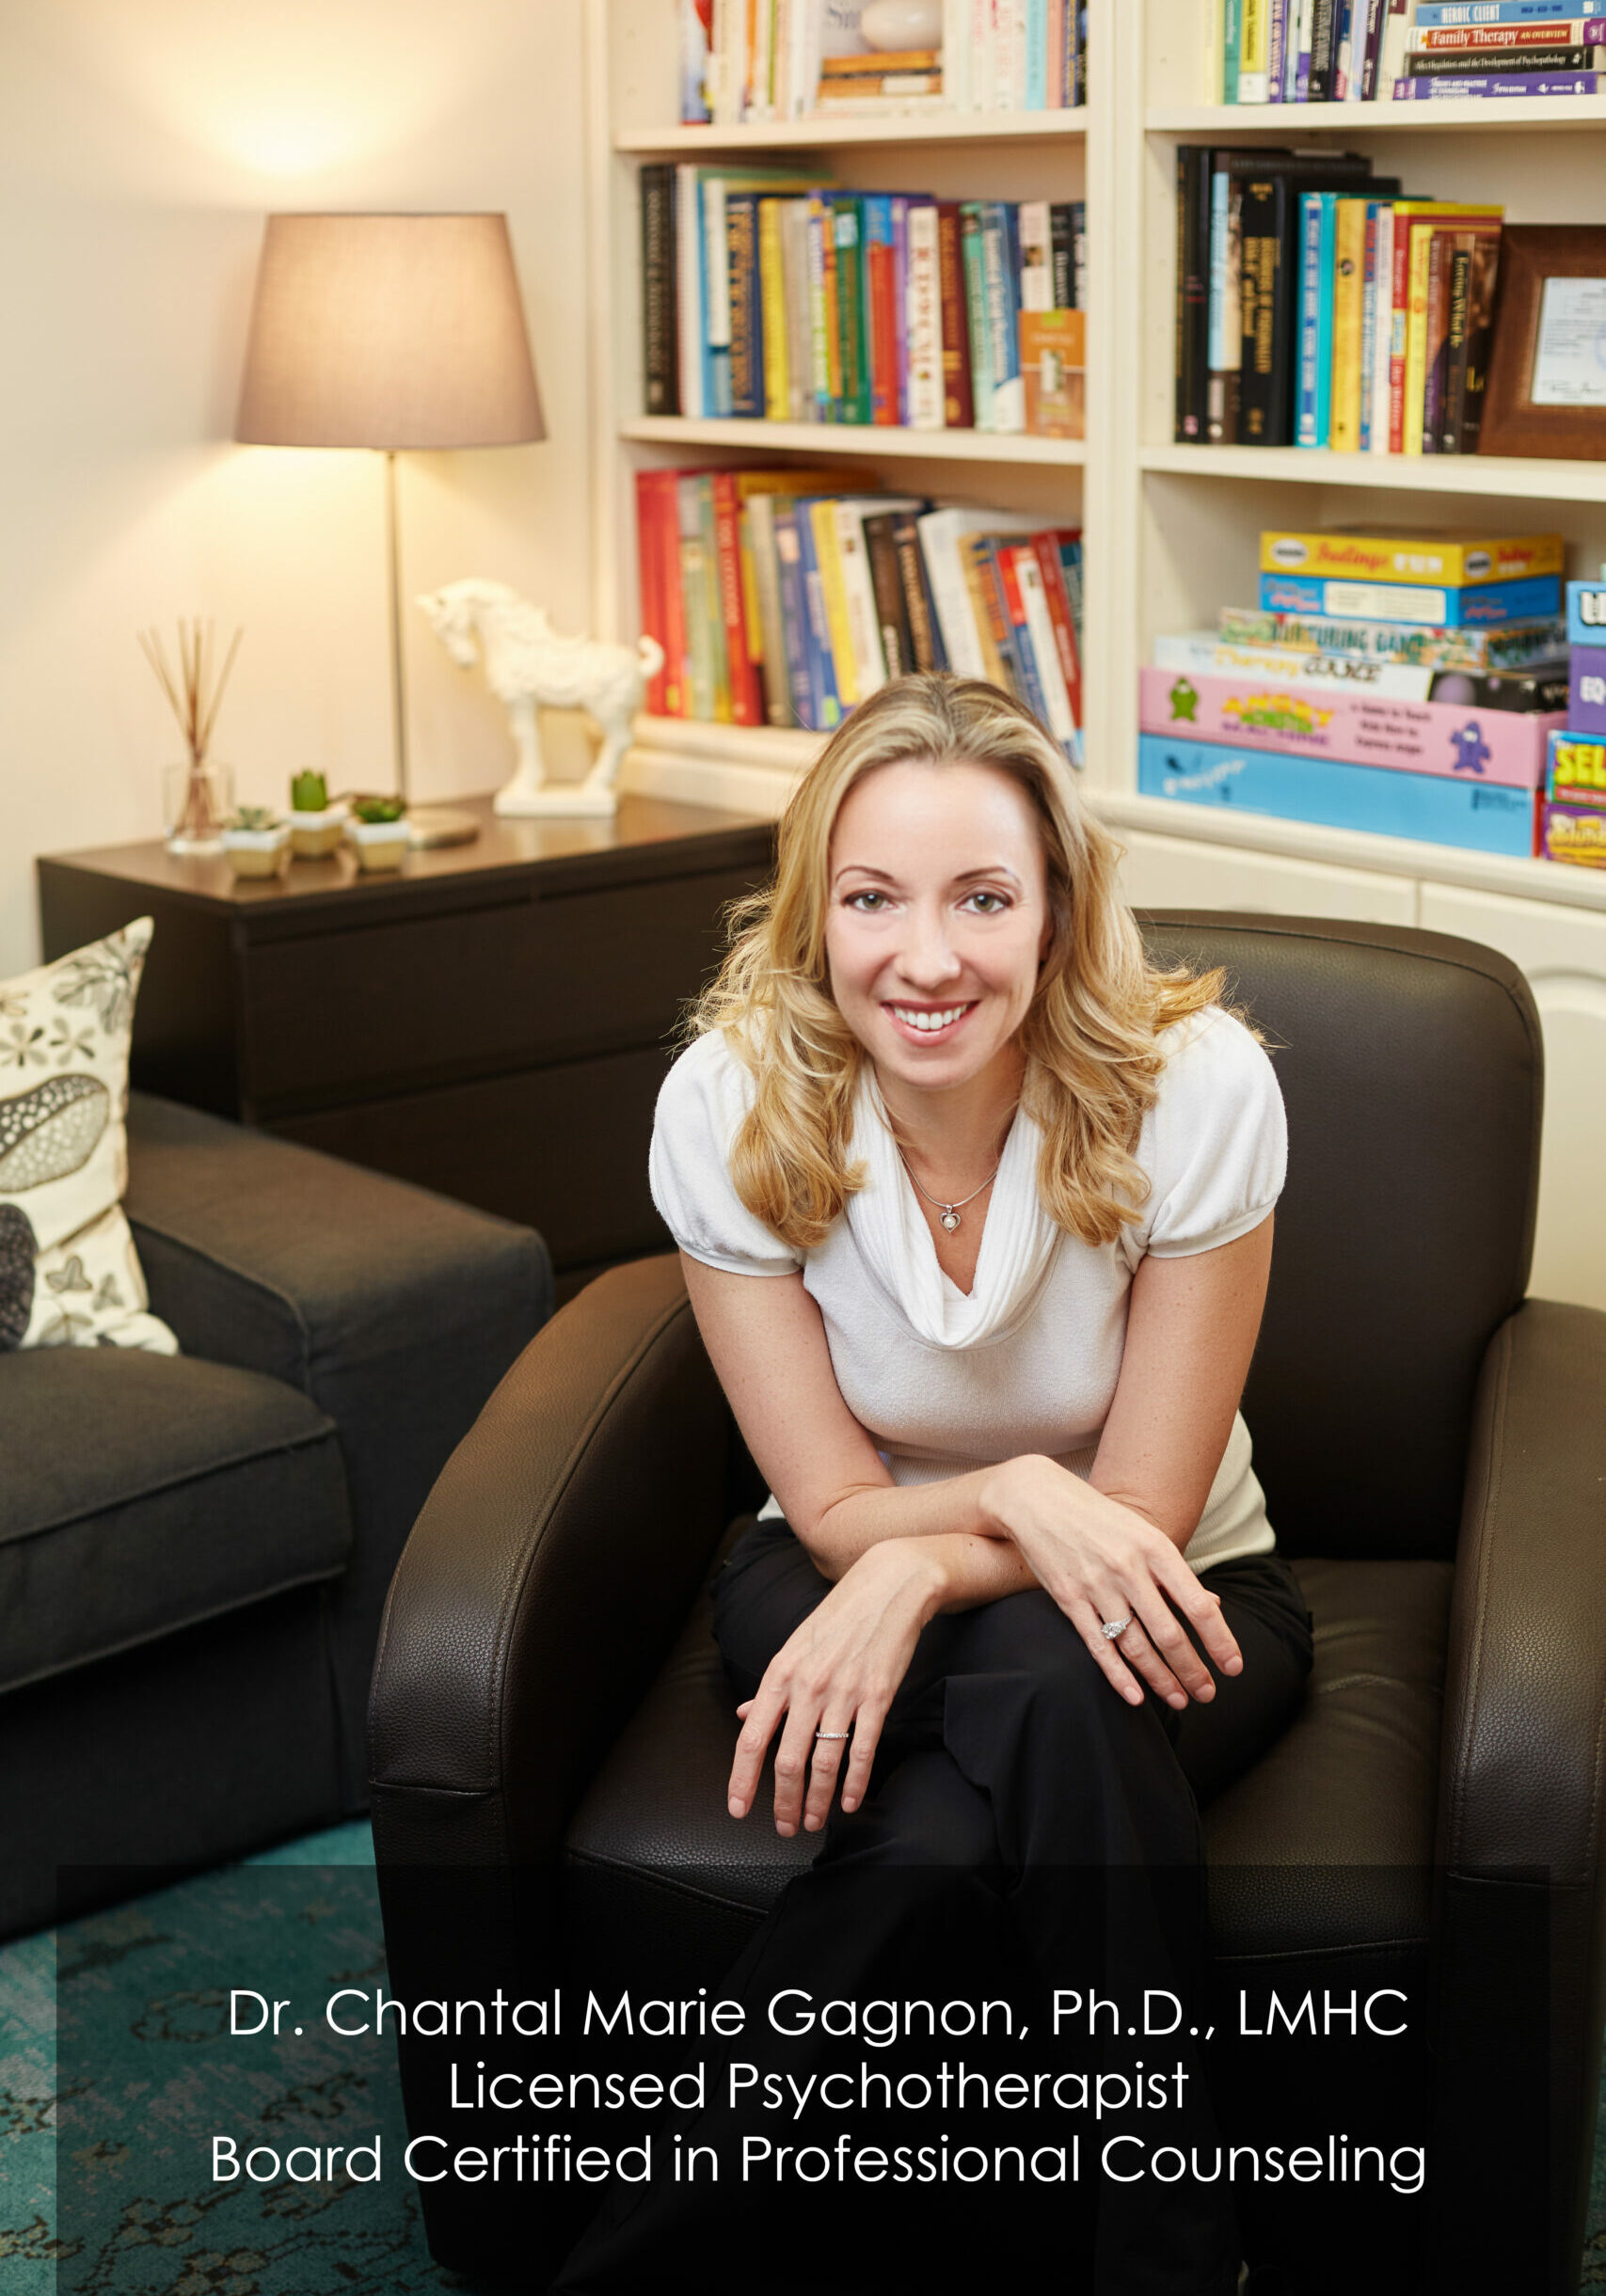 Meet Our Exceptional Therapist: A Friendly Face with Top-Notch Expertise in Psychology